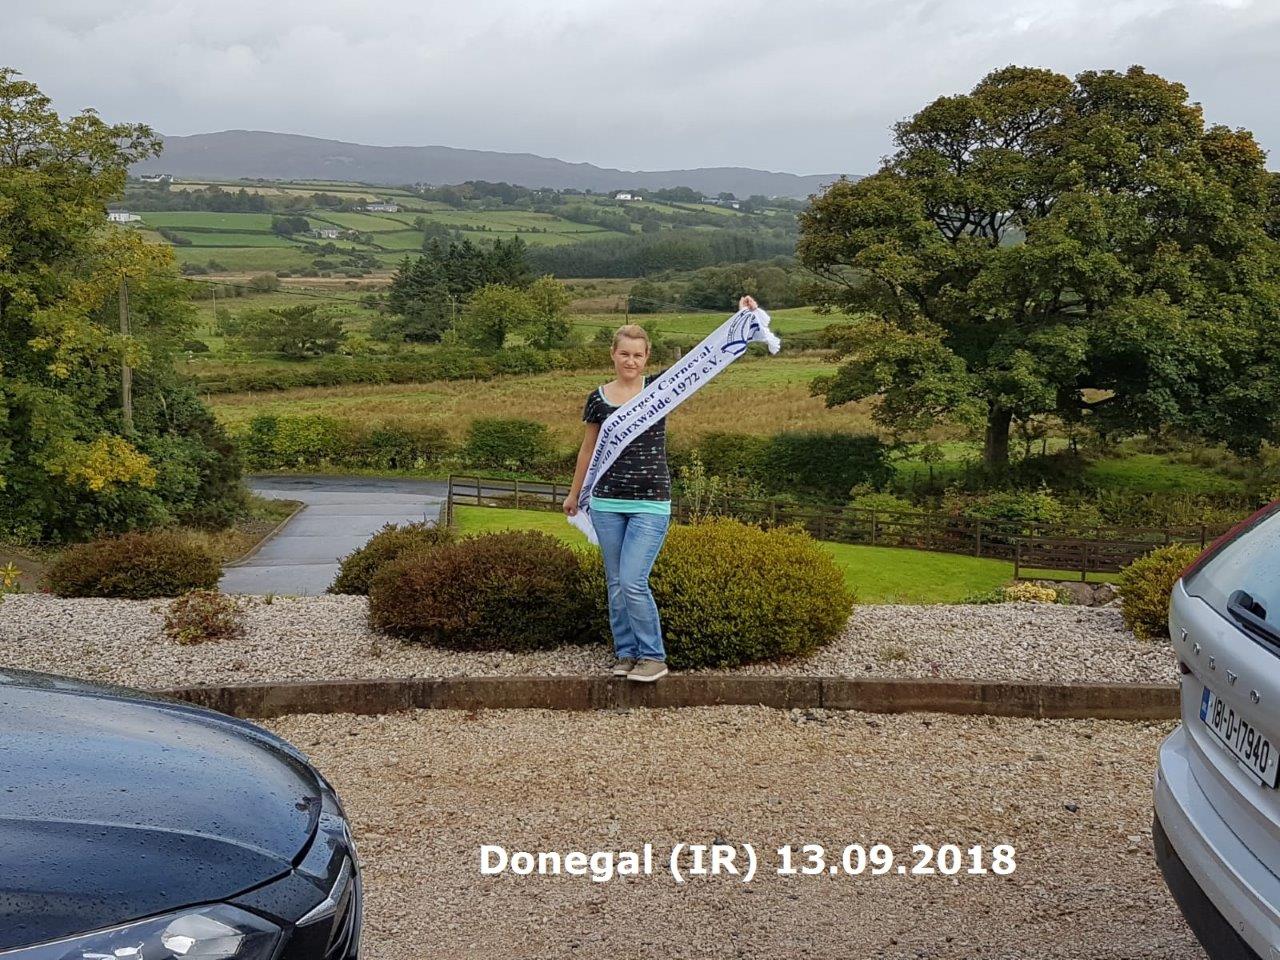 Donegal 1